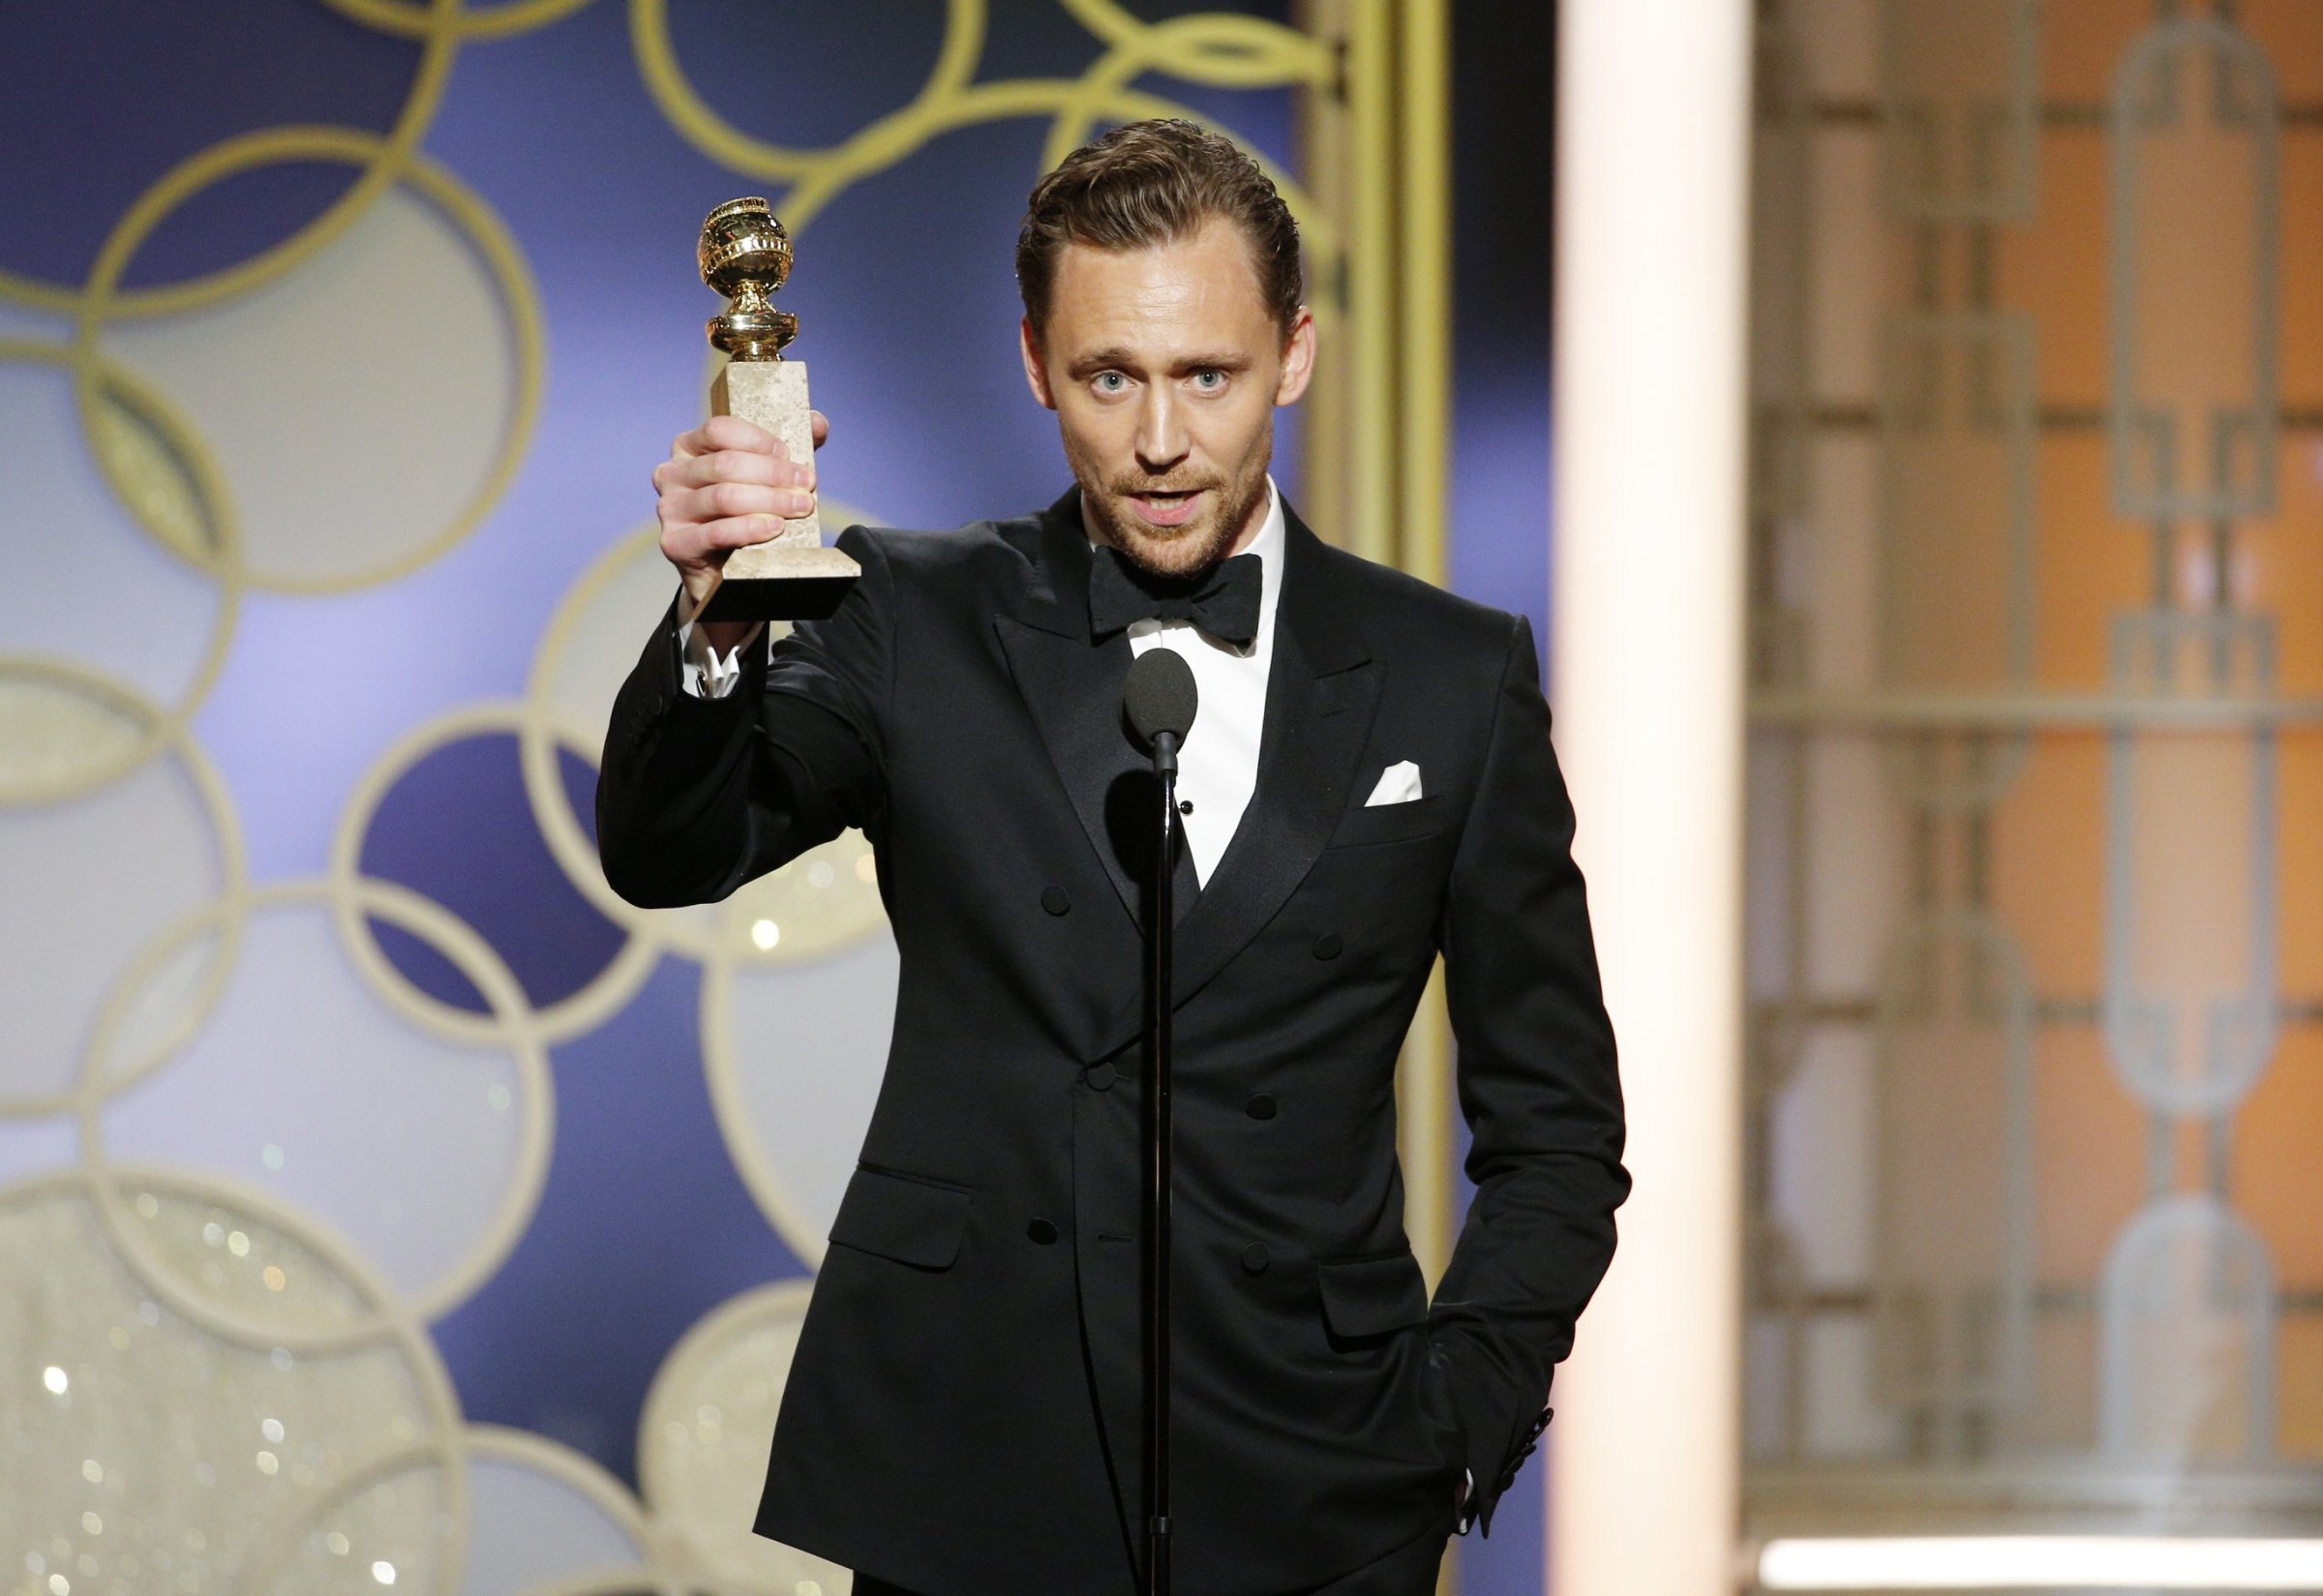 Tom Hiddleston accepts the award for Best Actor - Limited Series or Motion Picture for TV for his role in "The Night Manager" onstage during the 74th Annual Golden Globe Awards at The Beverly Hilton Hotel, Jan. 8, 2017 in Beverly Hills.